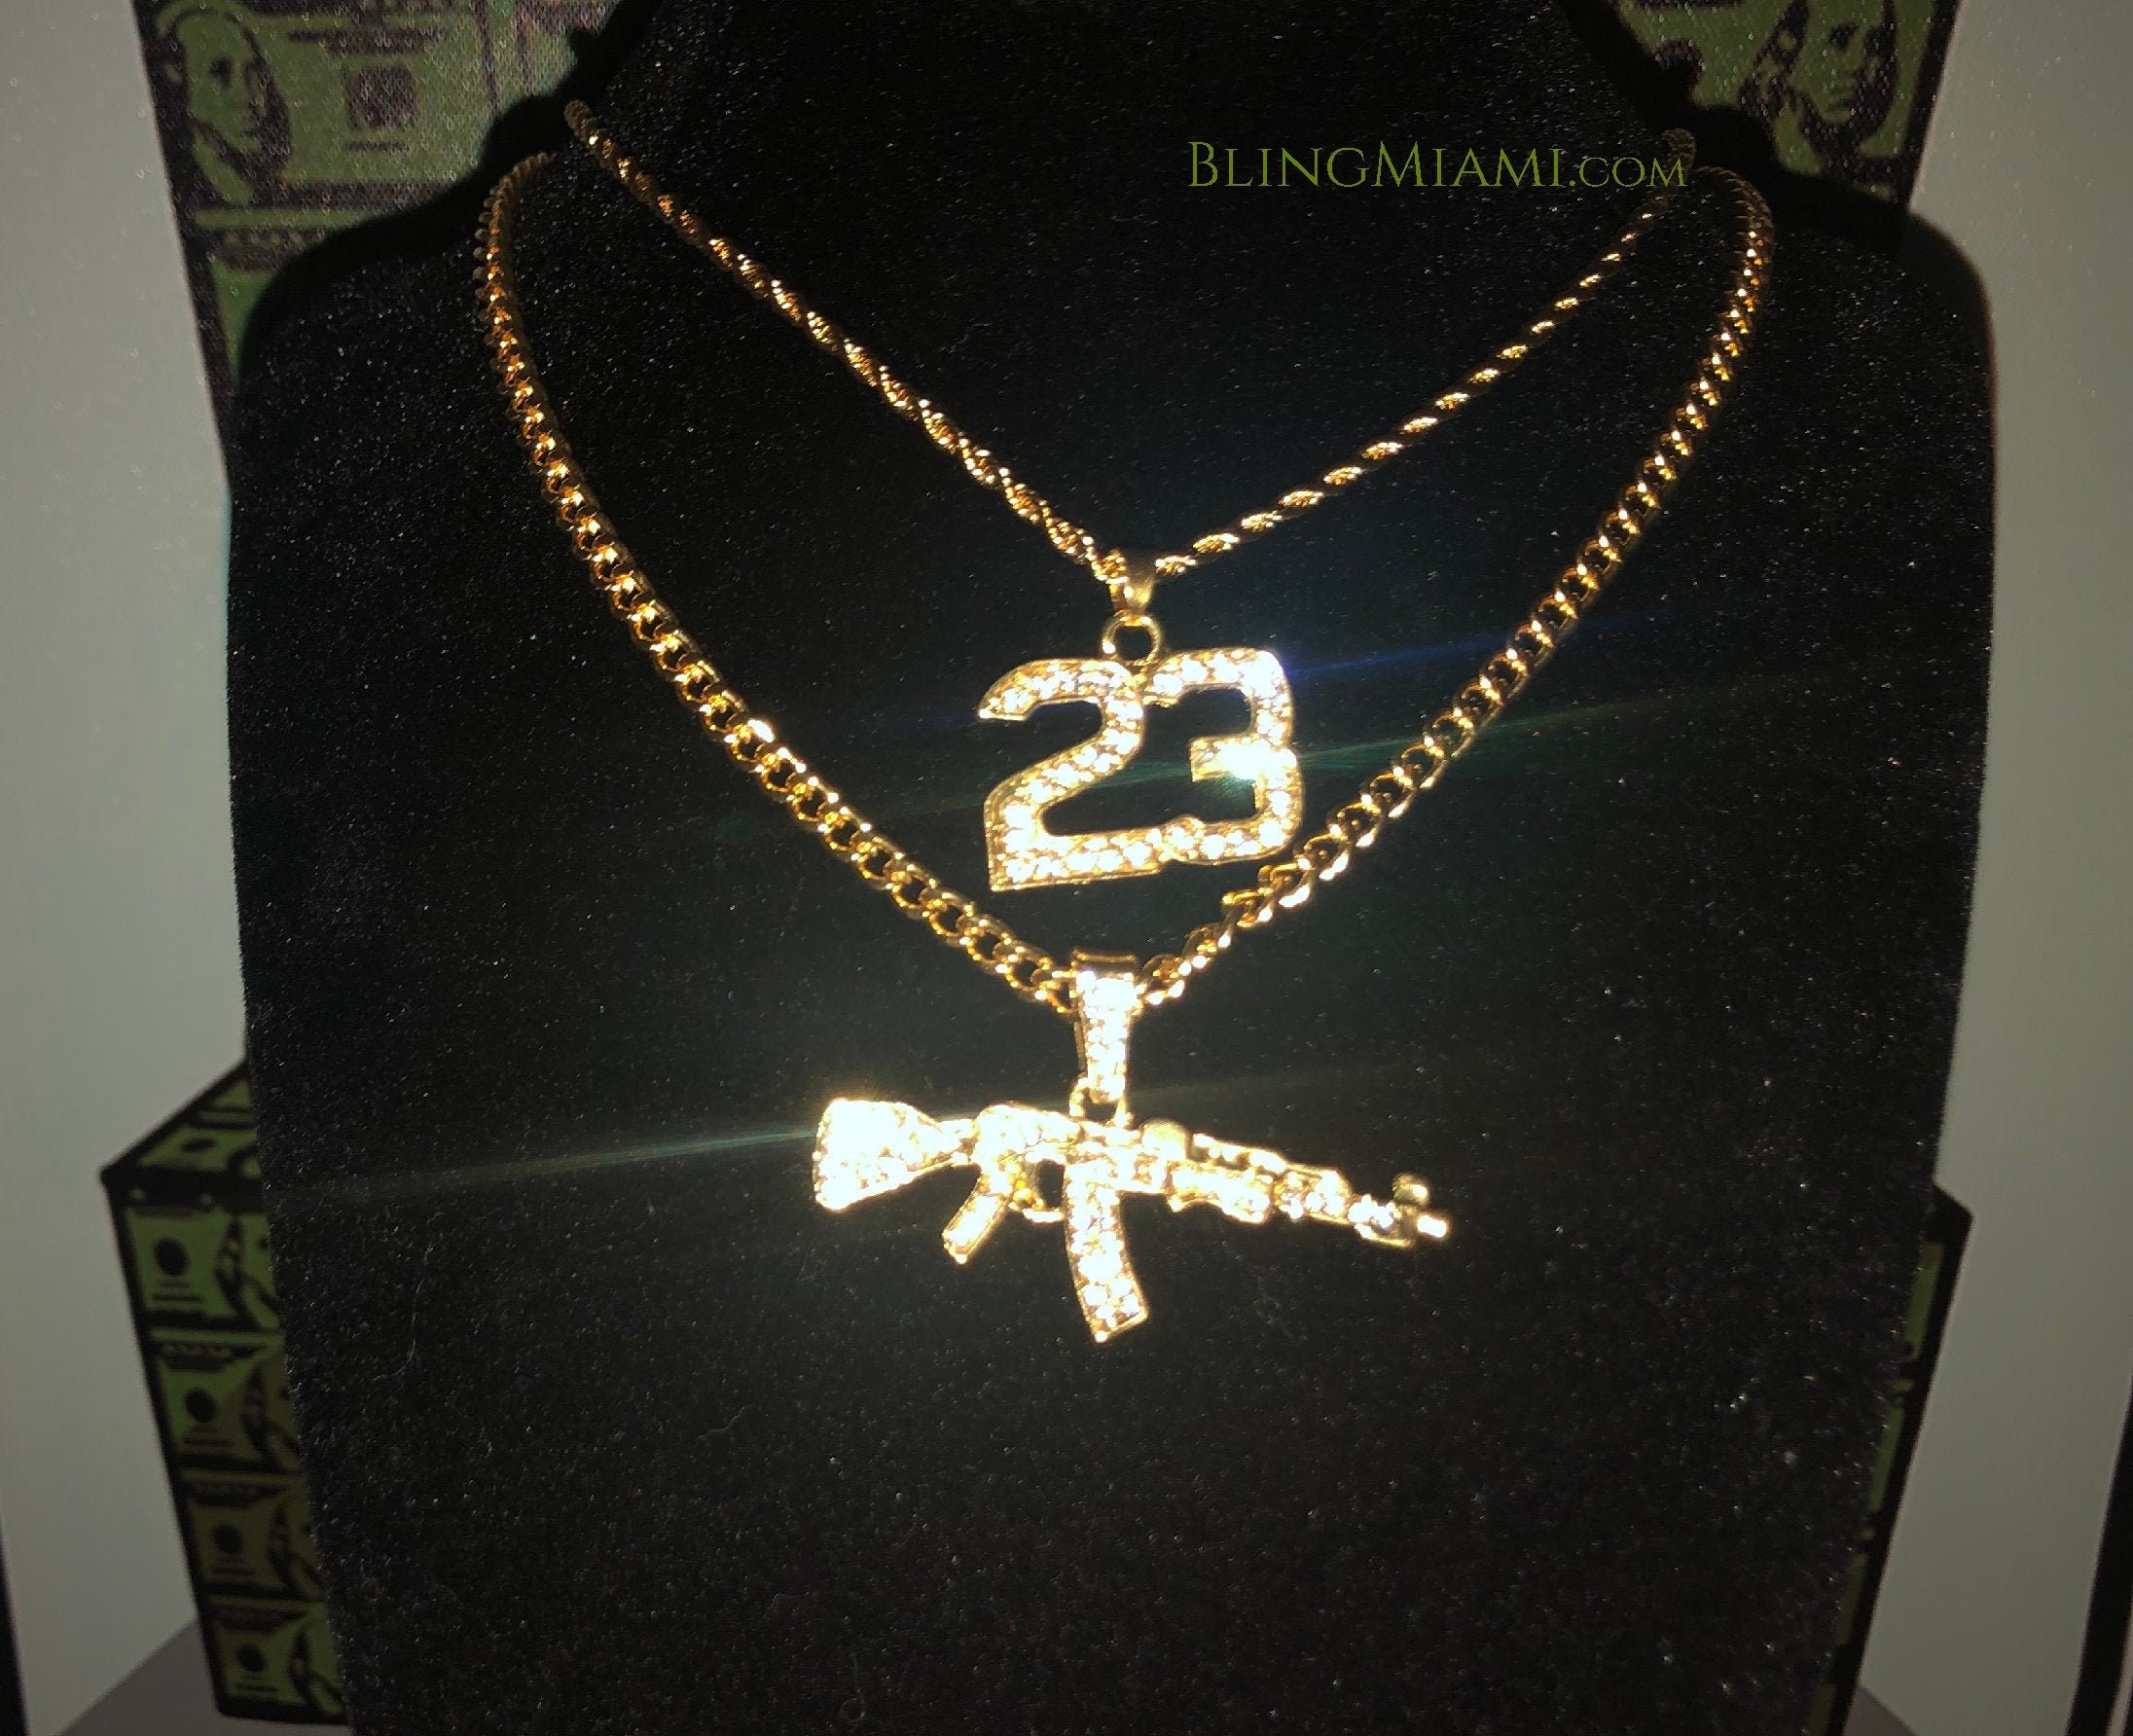 NBA YOUNGBOY custom made chain and pendant by Shyne